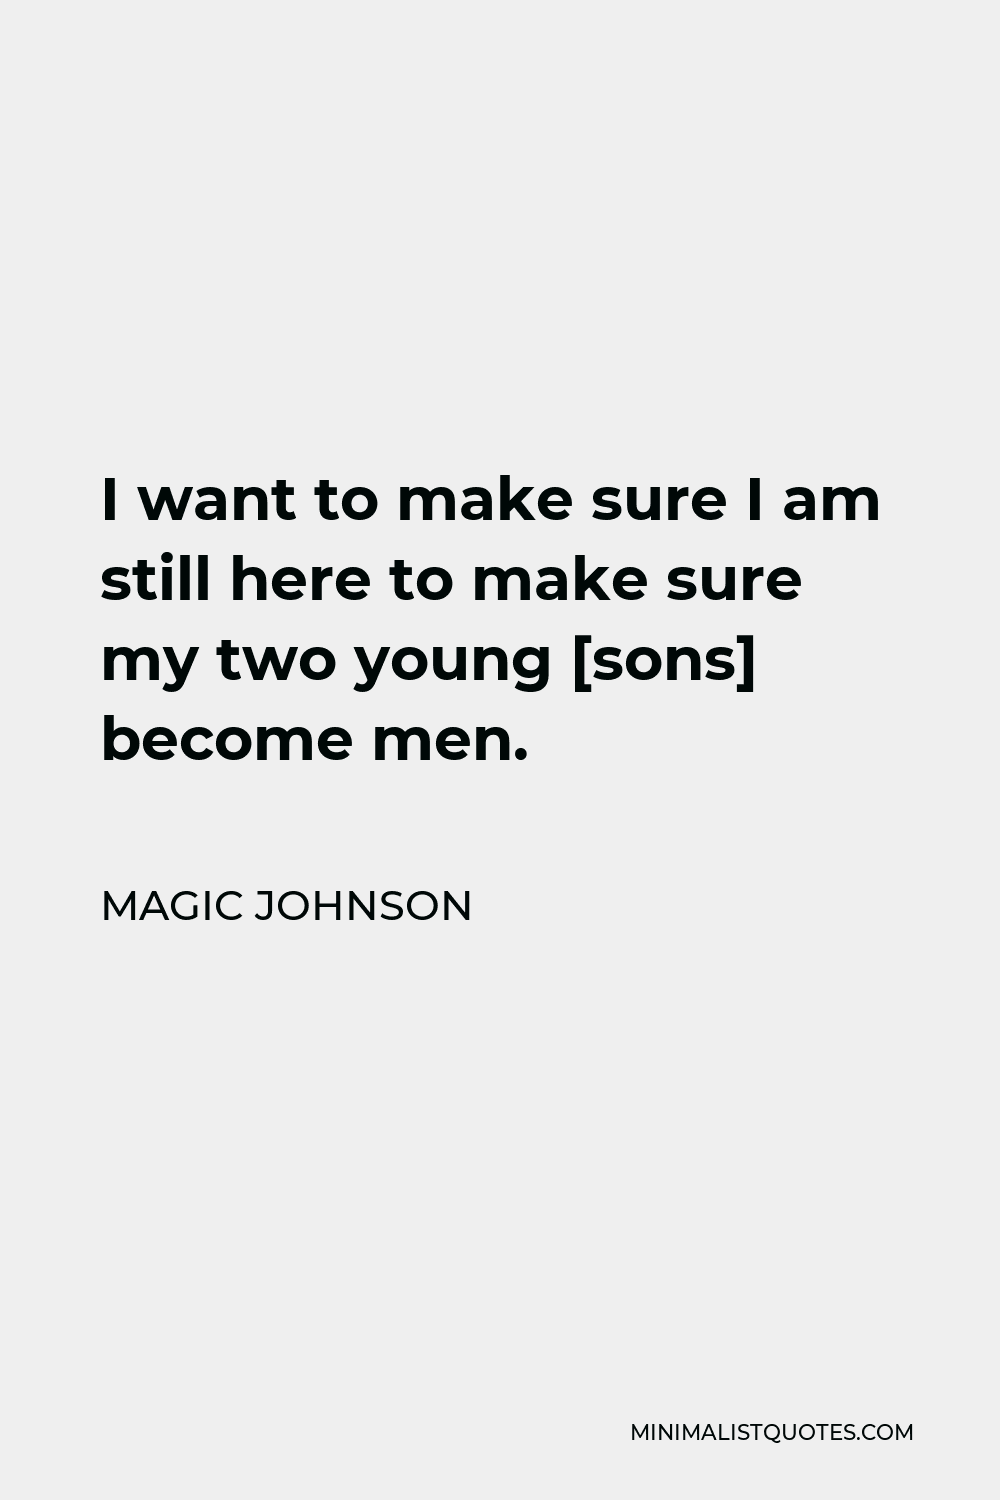 Magic Johnson Quote - I want to make sure I am still here to make sure my two young [sons] become men.